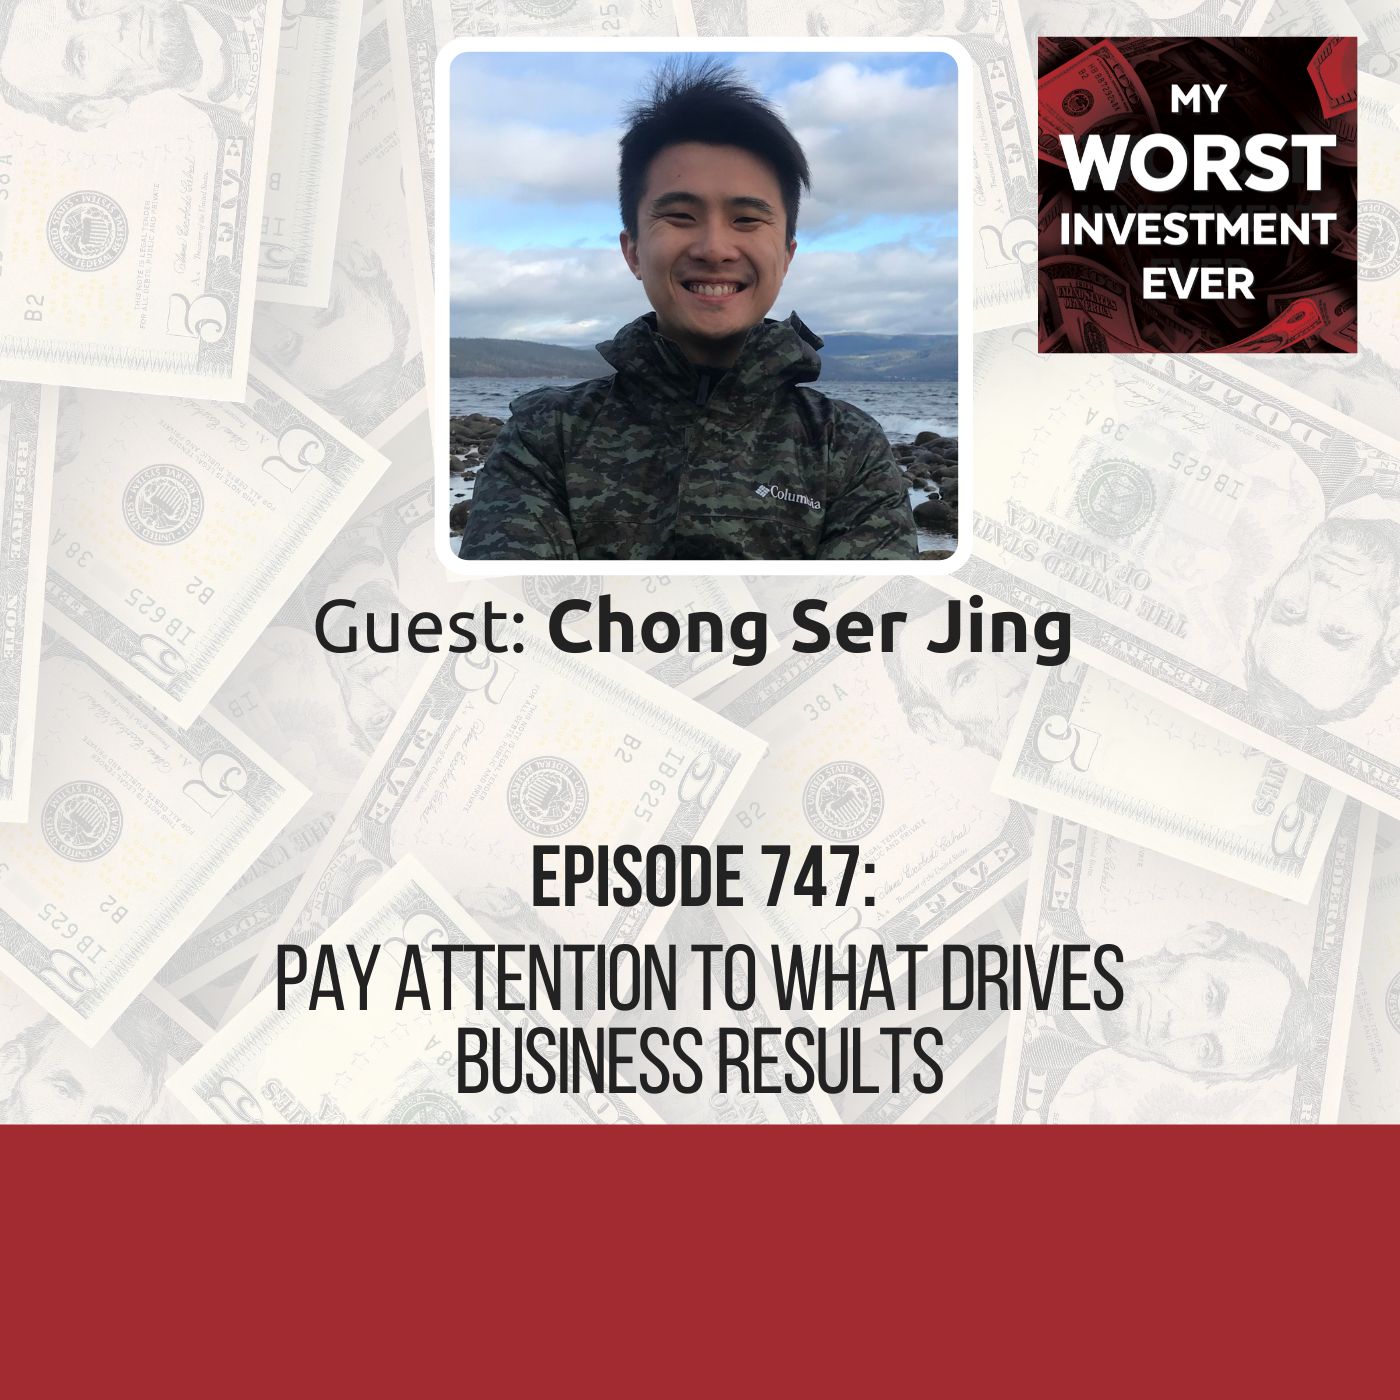 Chong Ser Jing – Pay Attention to What Drives Business Results